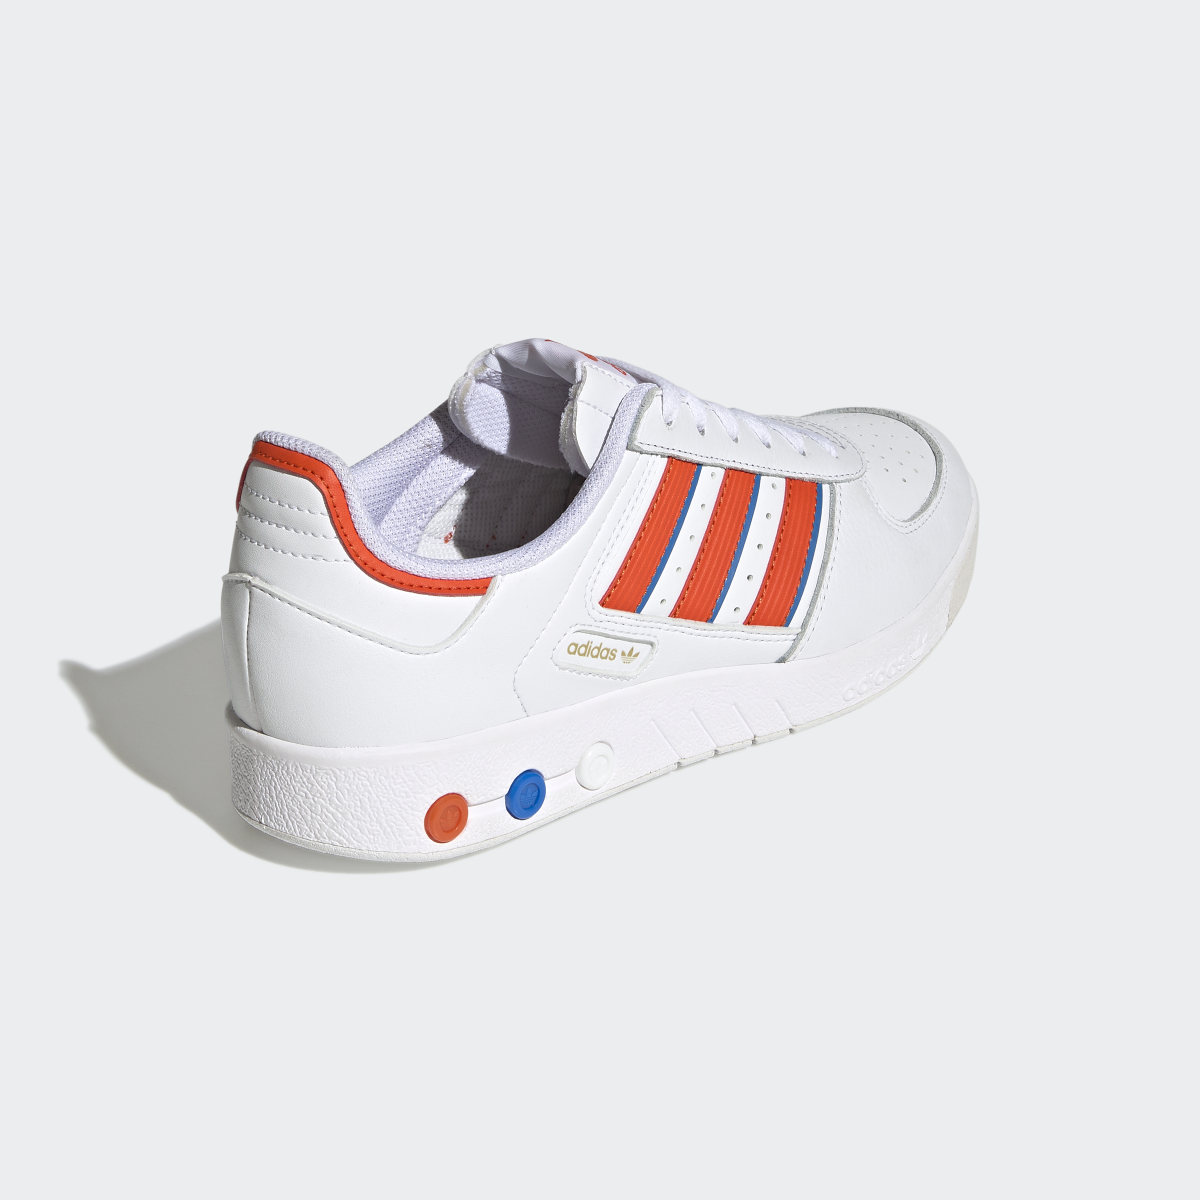 Adidas G.S. Court Shoes. 6